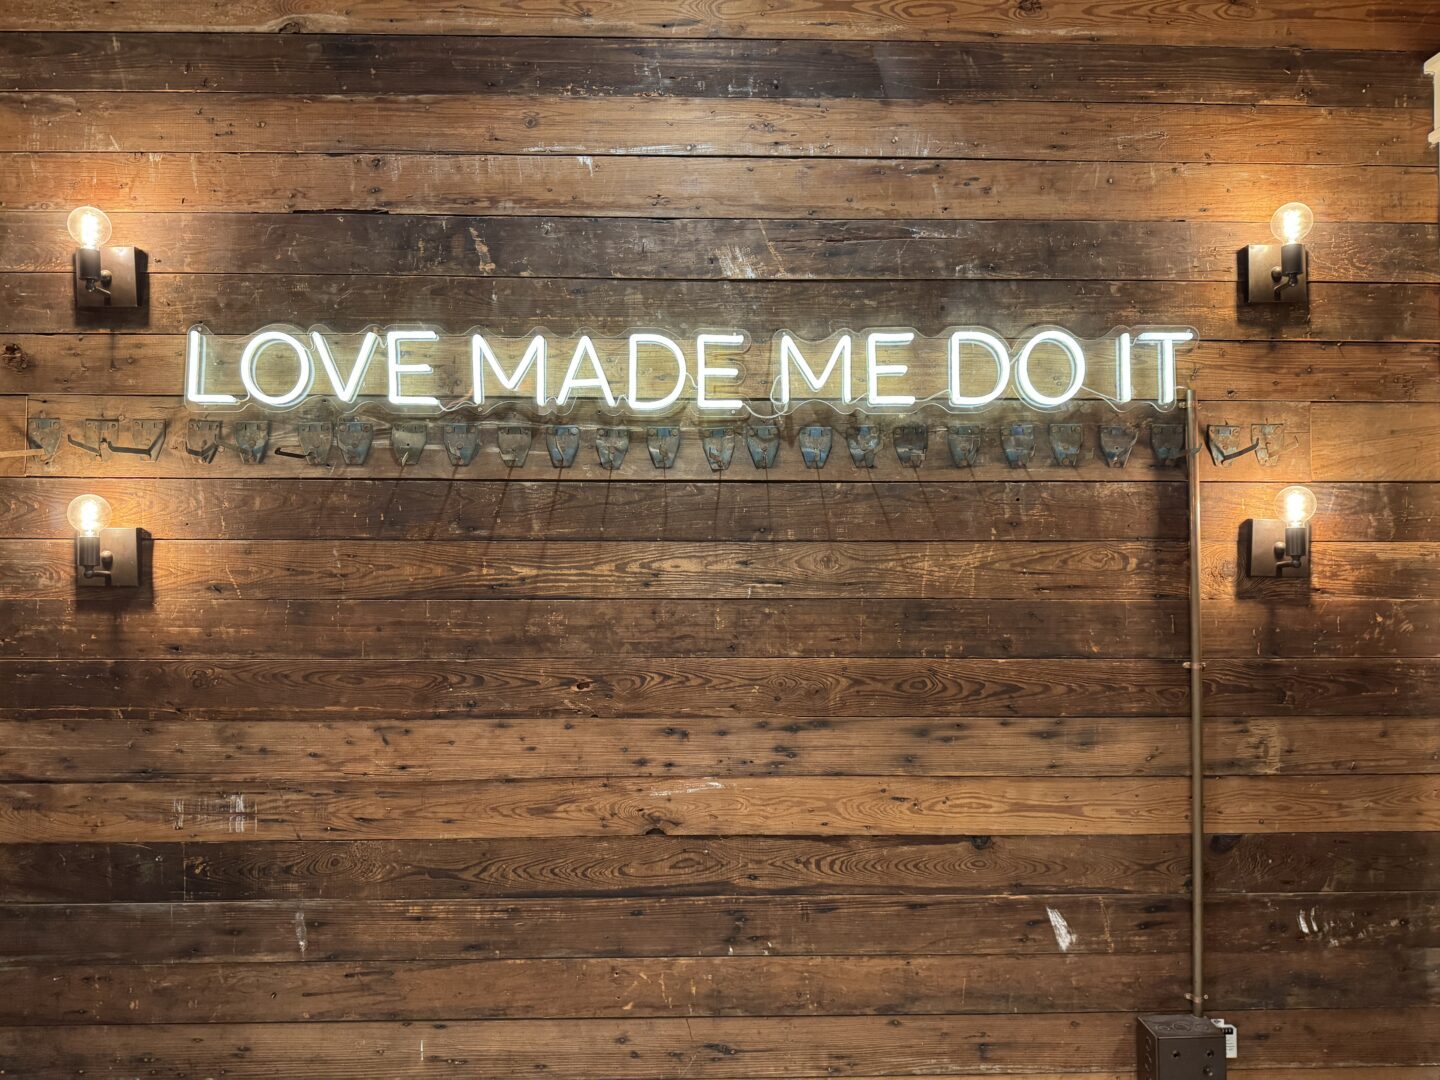 Love made me do it neon sign from Georgetown square photographed as part of the Texas Photography Festival. 
